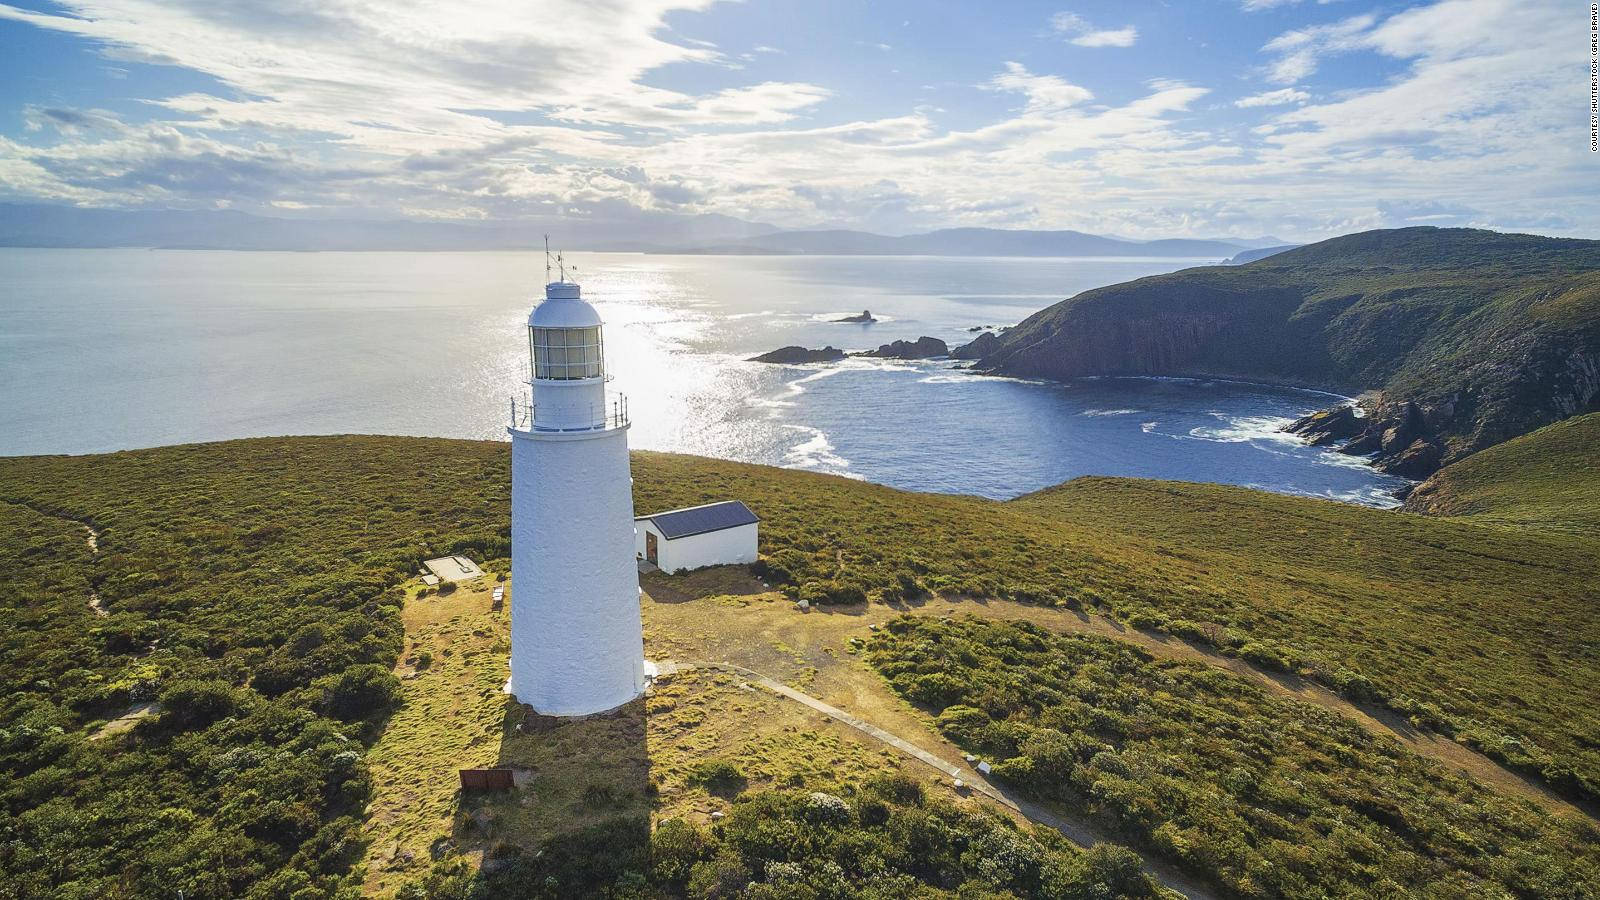 Tasmaniavitt Fyr - This Would Be A Suitable Translation For A Computer Or Mobile Wallpaper Featuring The Tasmania White Lighthouse. Wallpaper